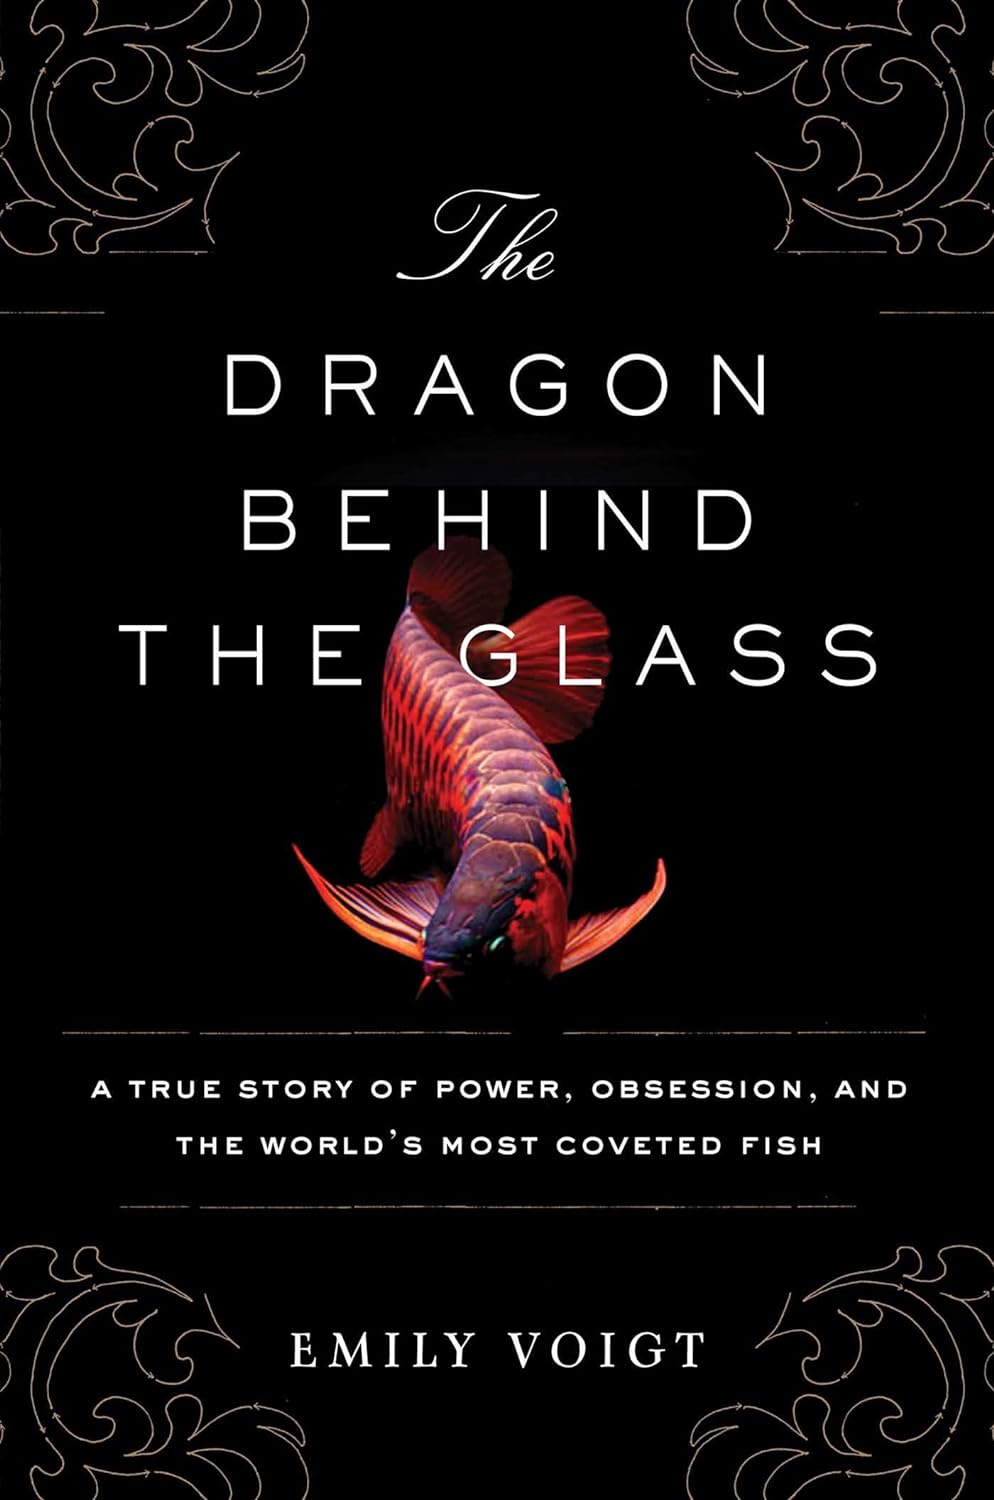 The Dragon Behind the Glass: A True Story of Power, Obsession, and the World's Most Coveted Fish - Emily Voigt (Pre-Loved)